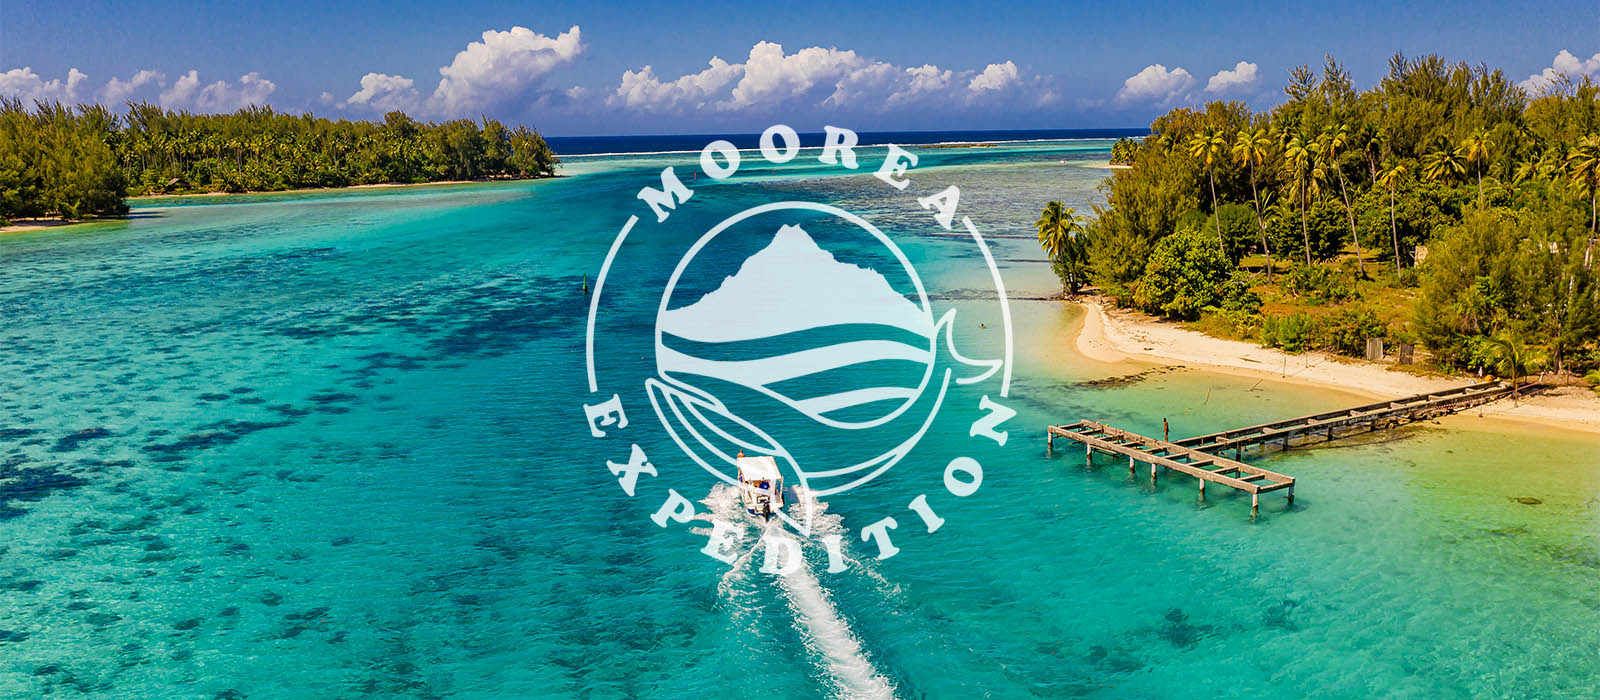 Moorea Expedition Whale Watching